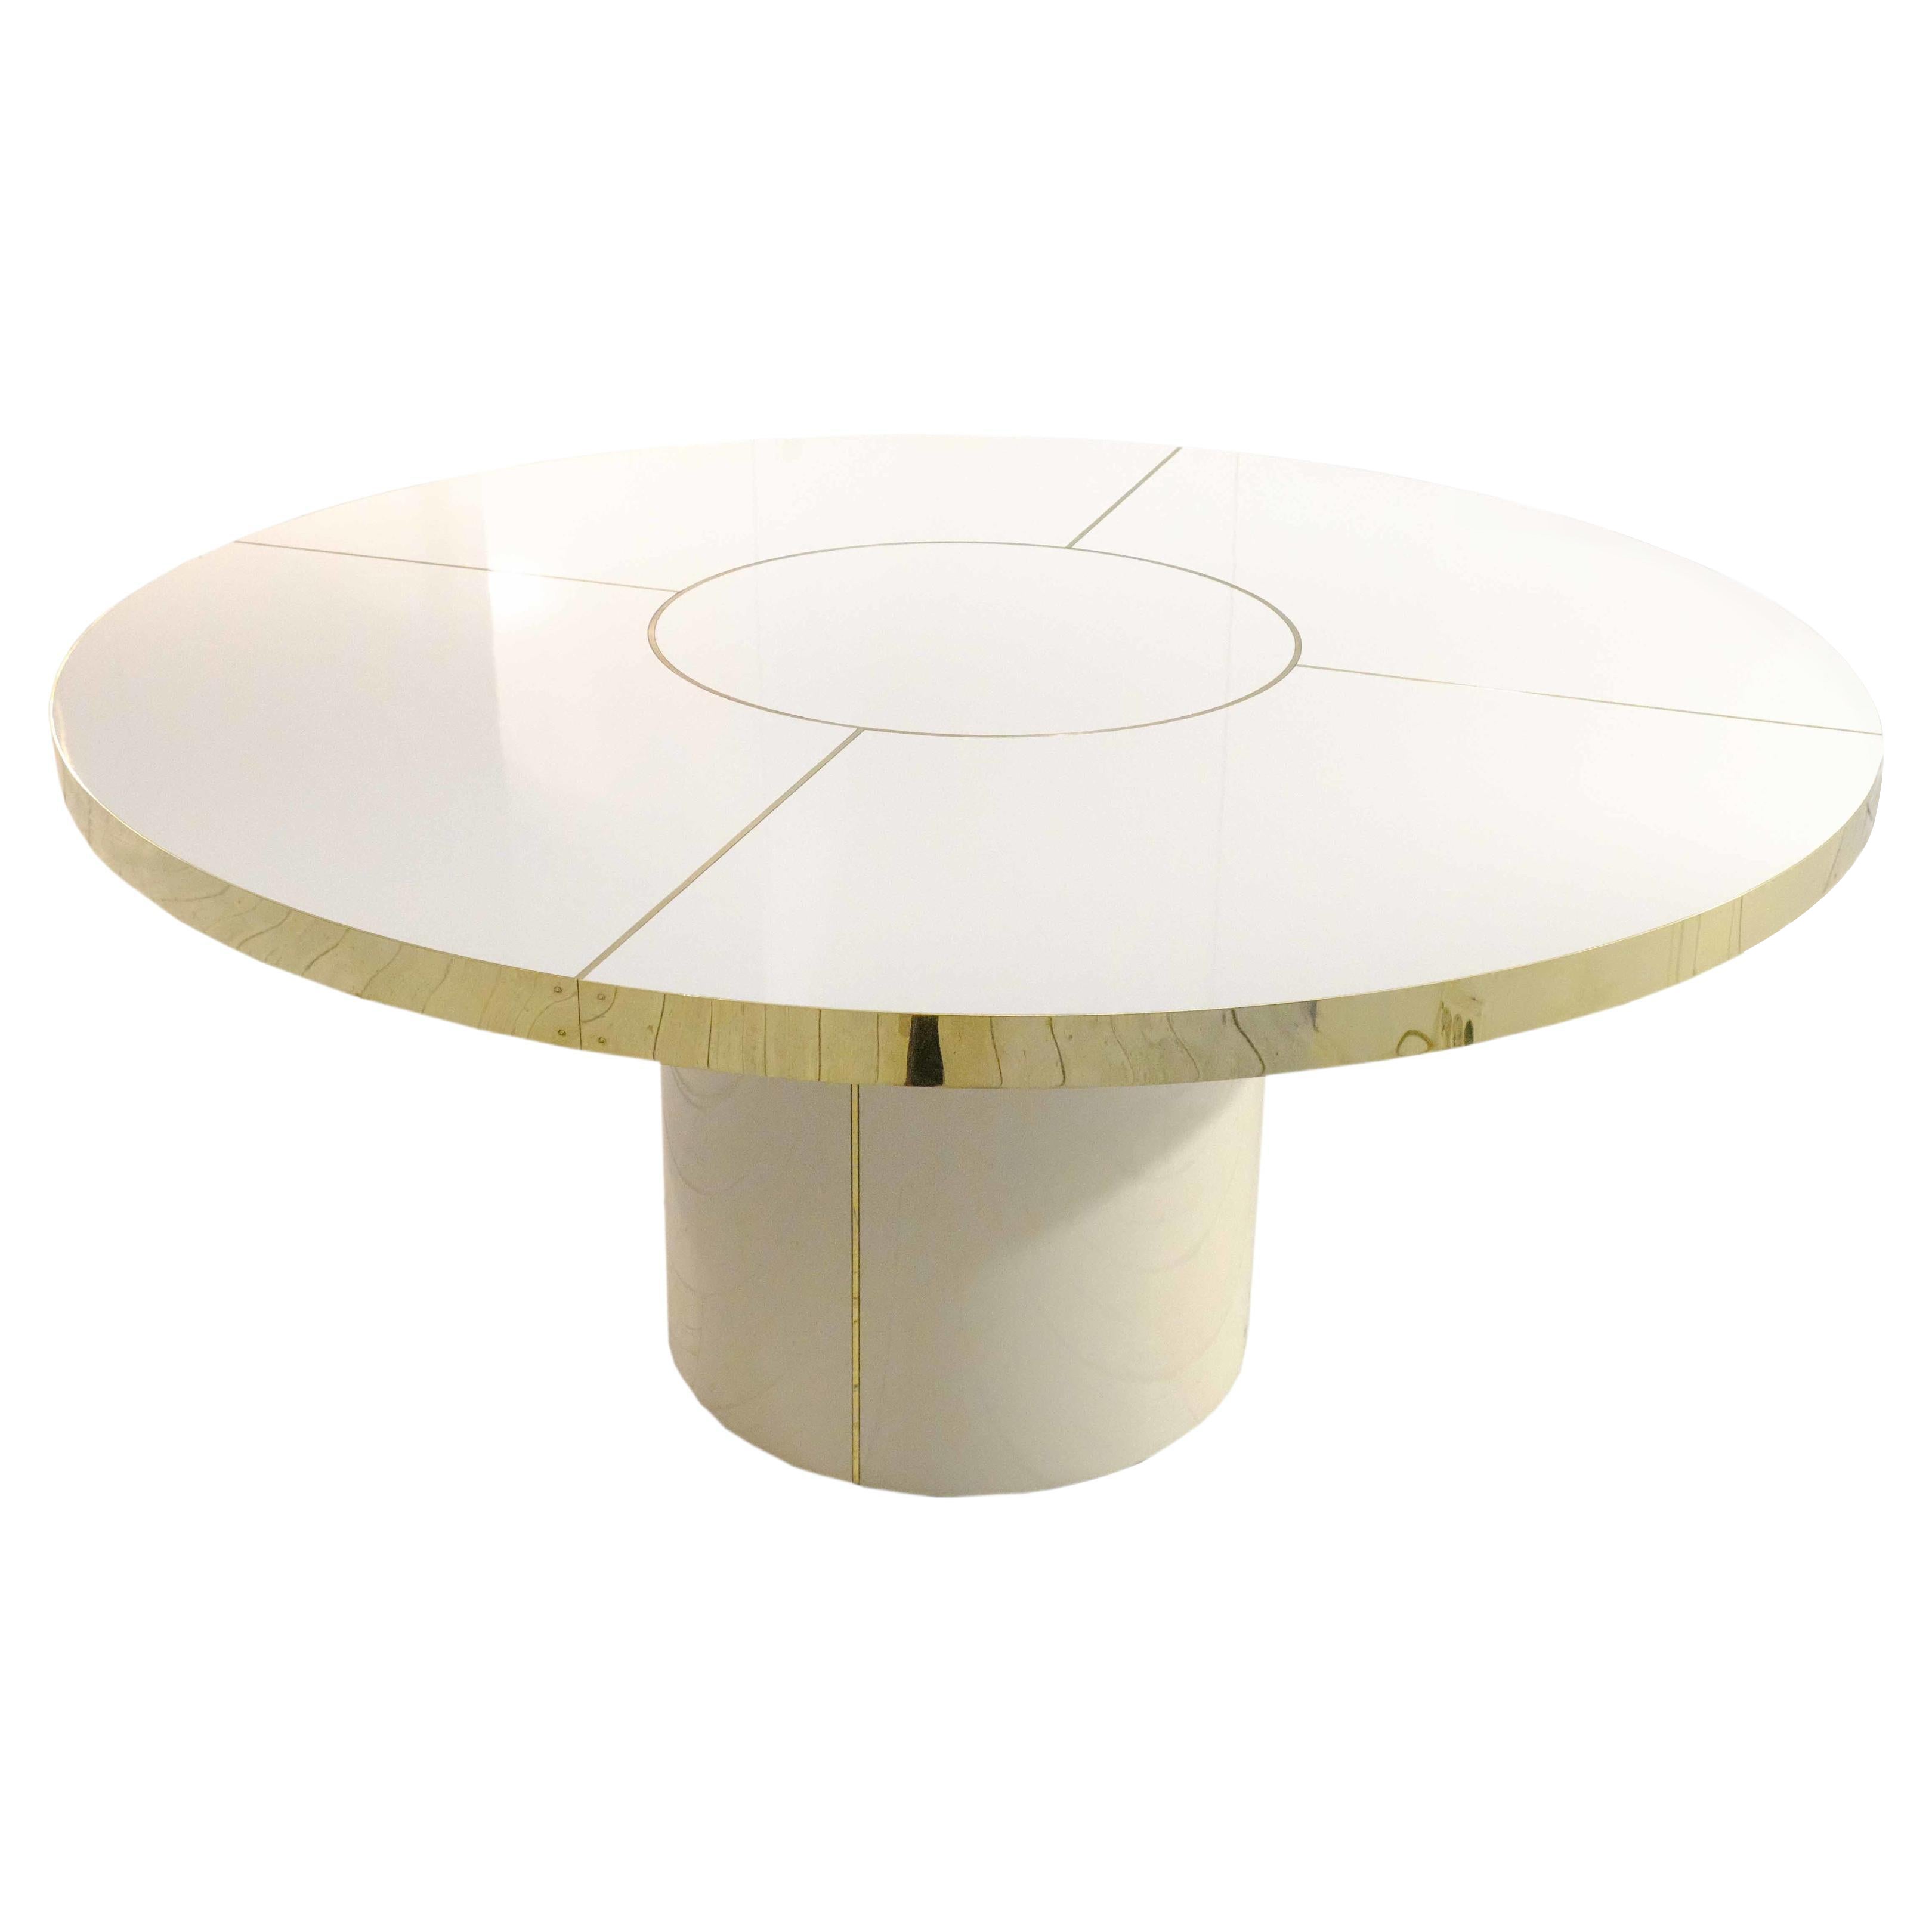 Retro Design Round Dining Table Palm Springs Style High Gloss Laminated&Brass L For Sale